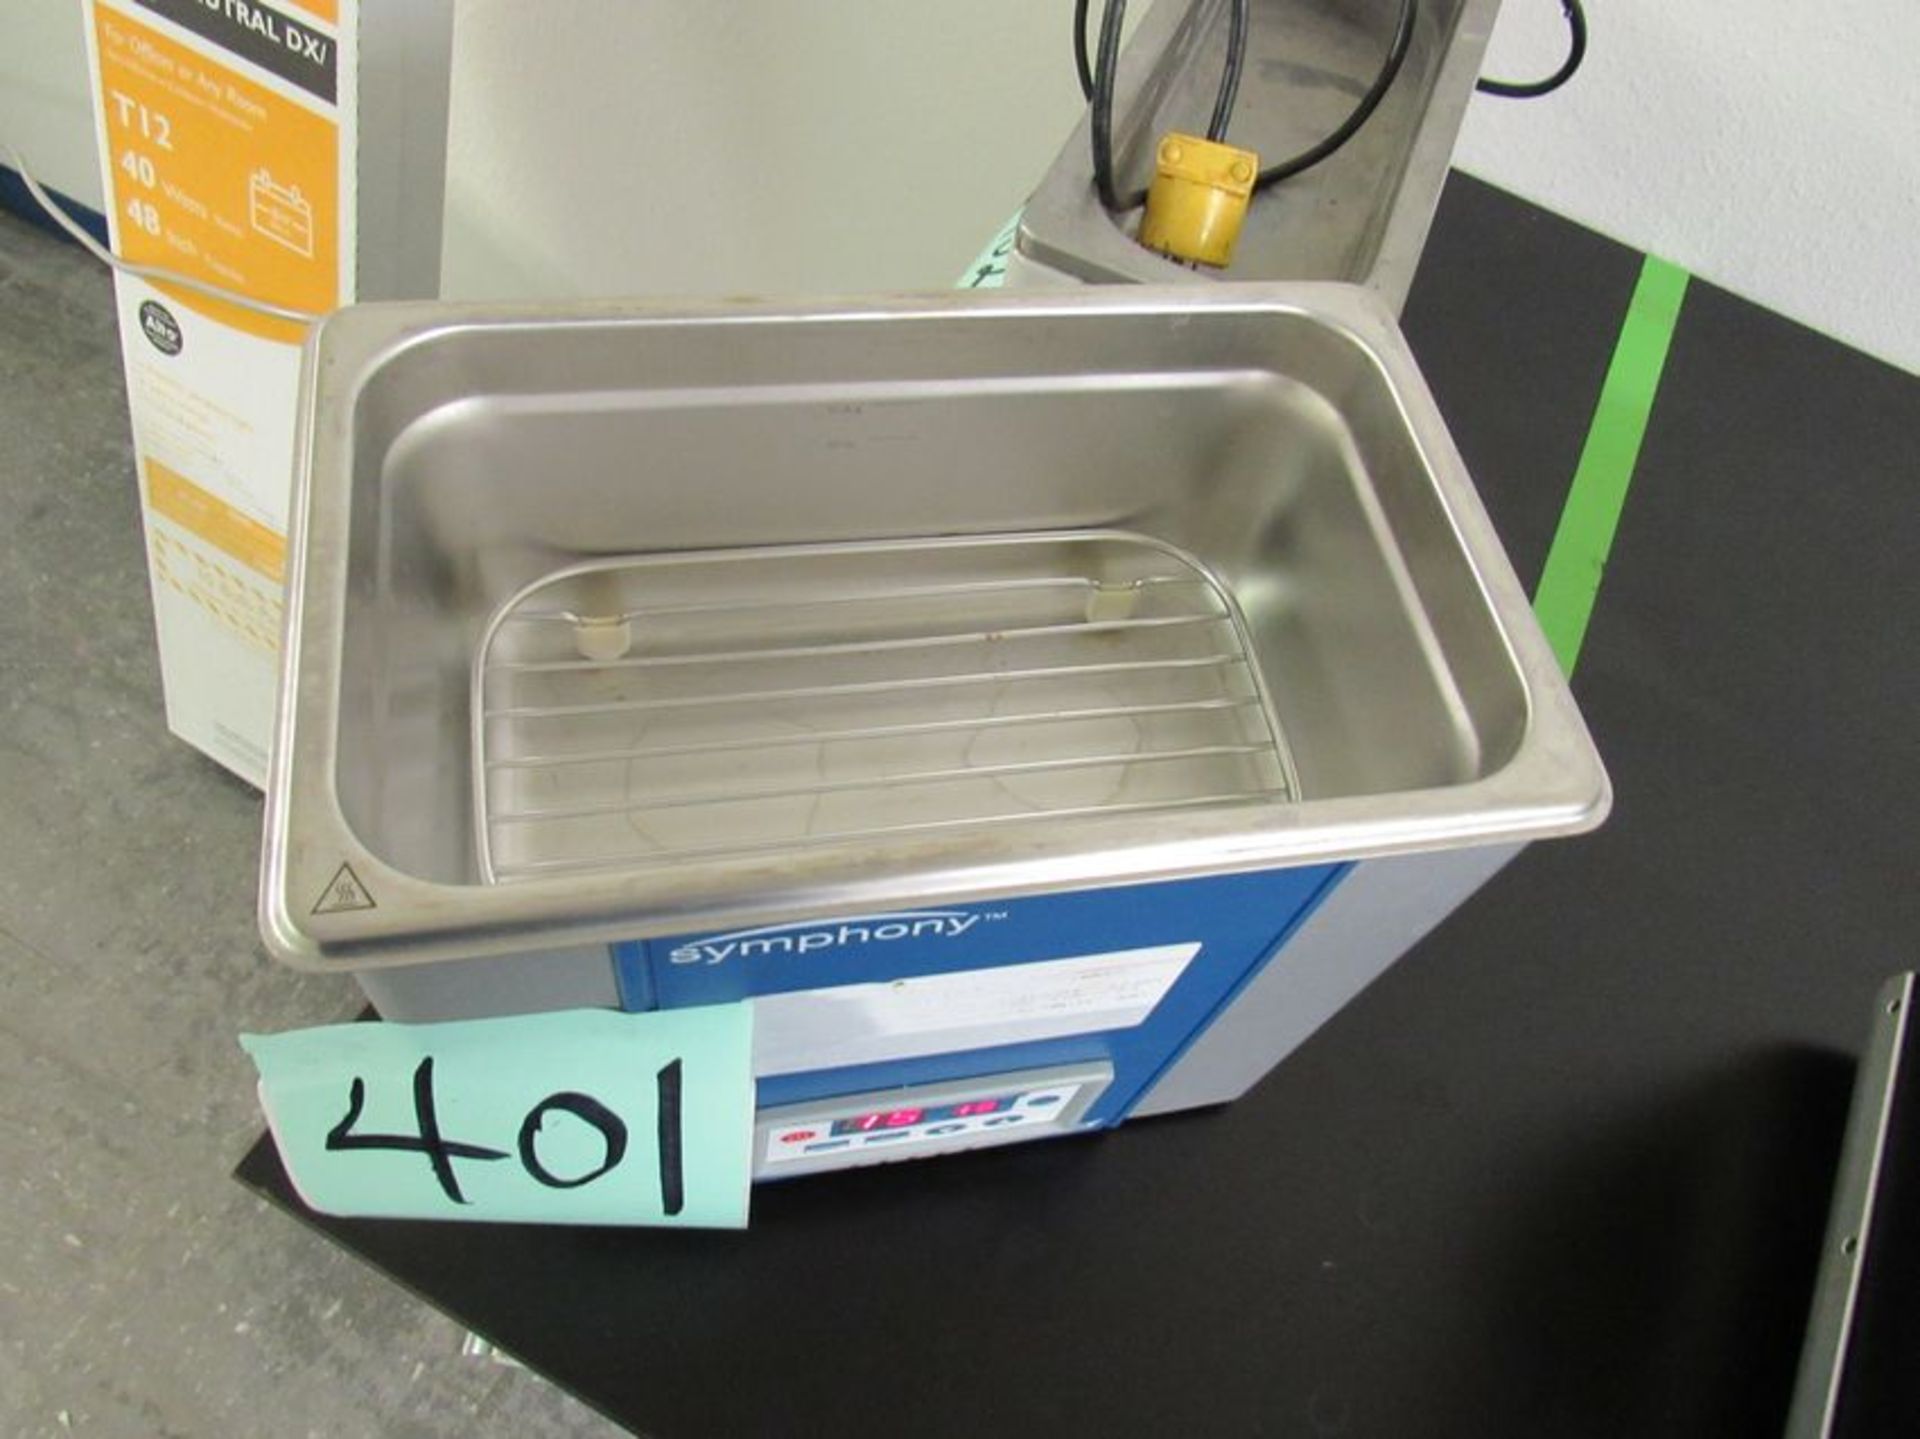 VWR Symphony Heated Sonicator Ultrasonic Cleaner. Model 97043-992, Serial No. 1112E1333. Removal and - Image 2 of 3